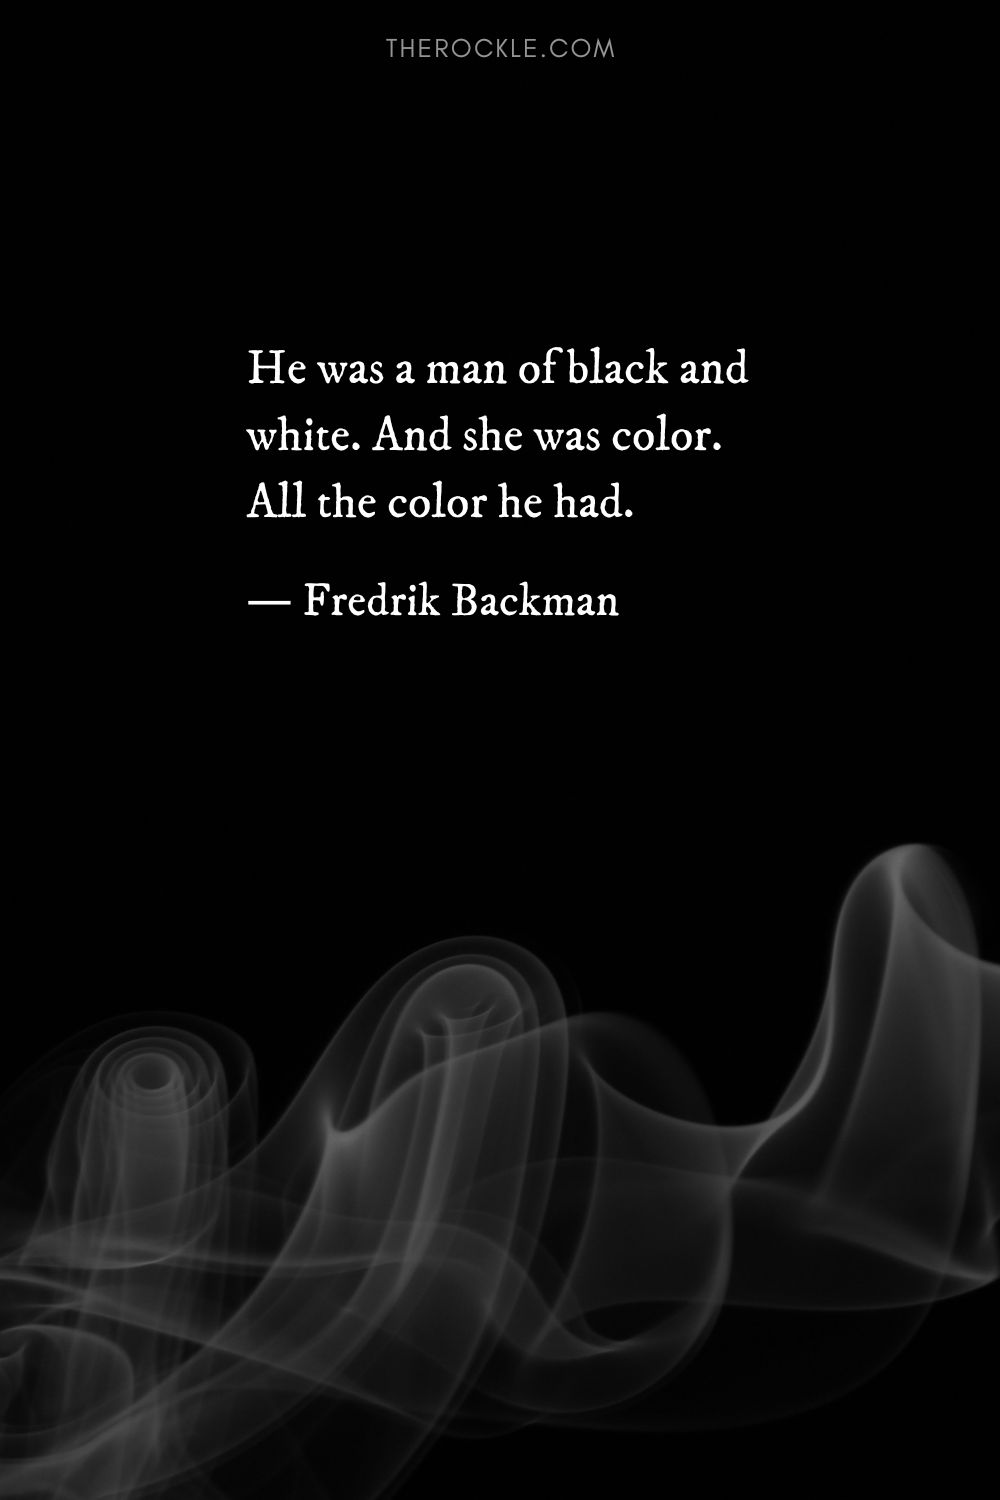 “He was a man of black and white. And she was color. All the color he had.” ― Fredrik Backman